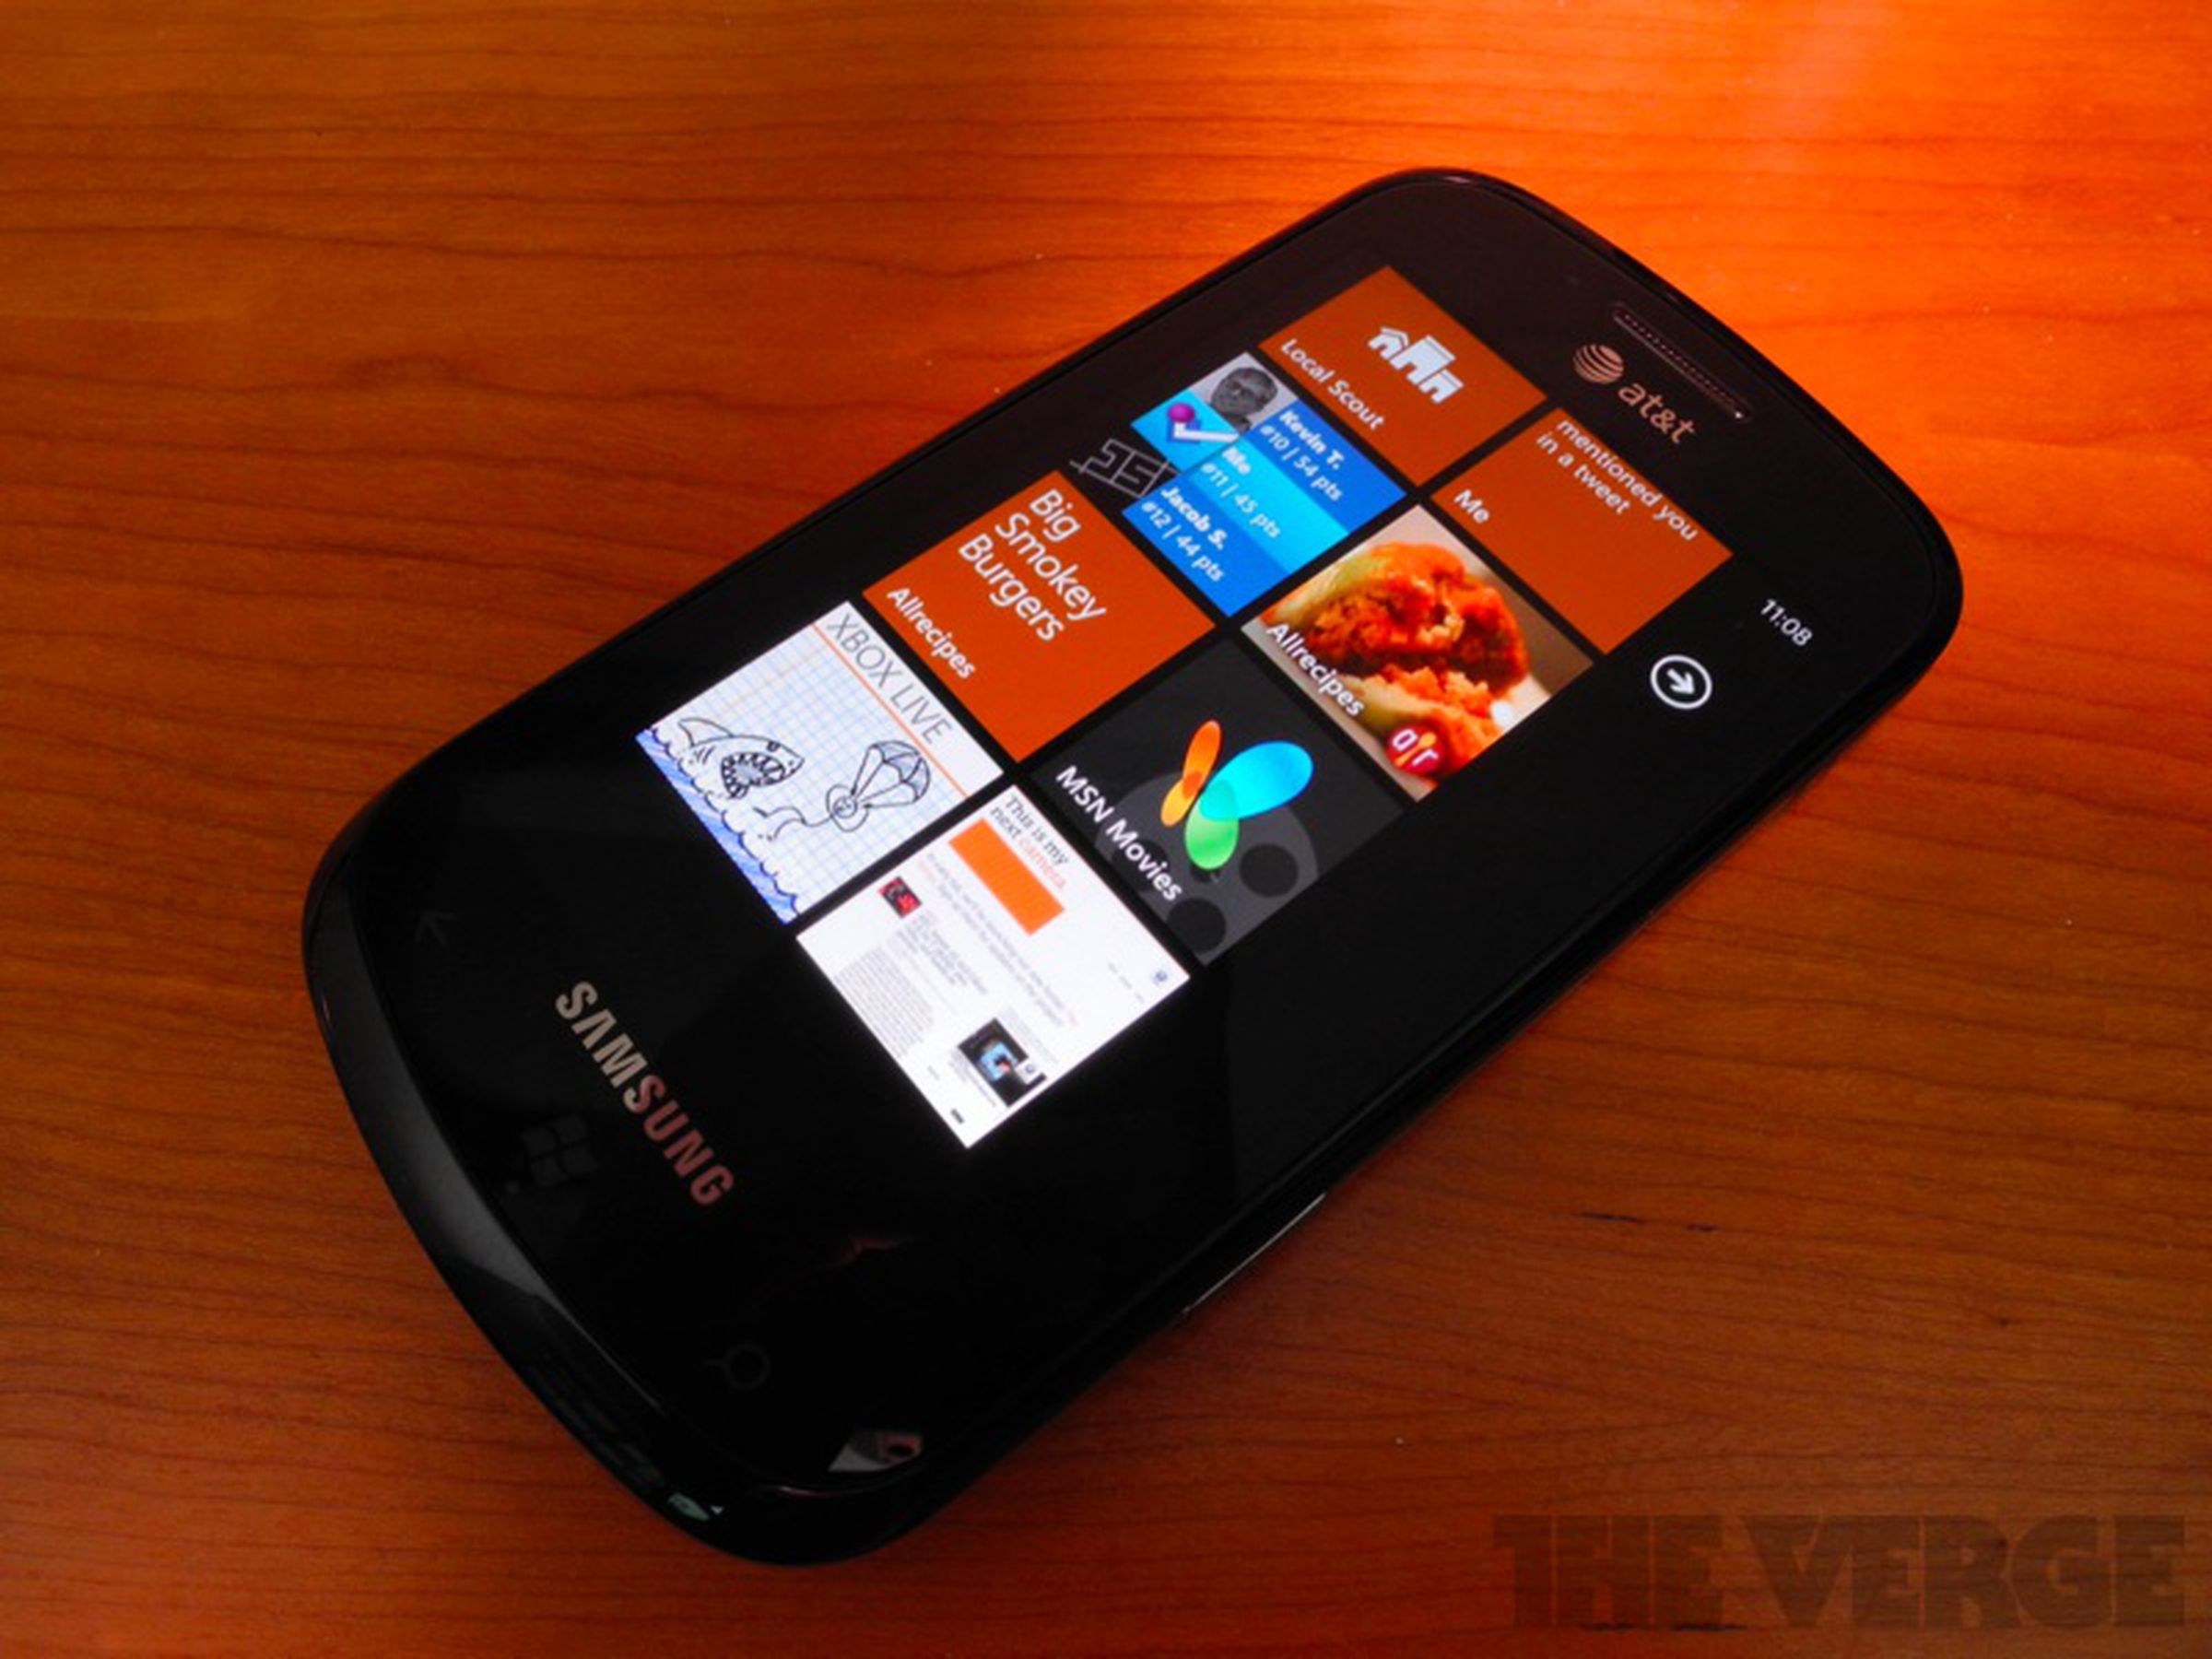 Windows Phone 7.5 review pictures